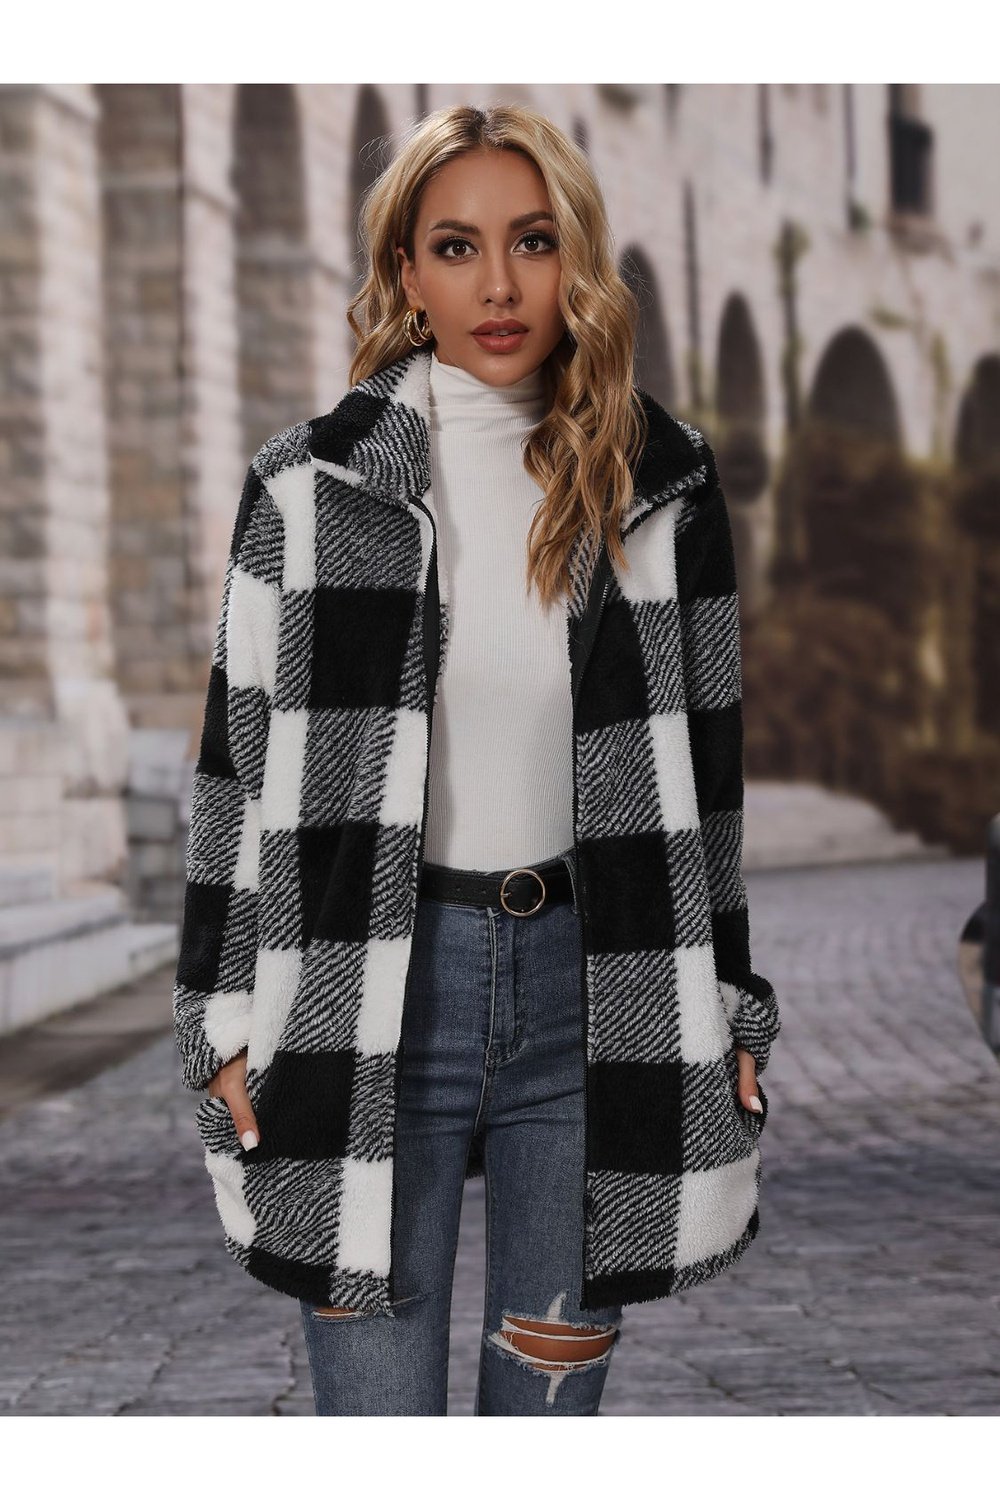 Plaid Collared Neck Coat with Pockets - Jackets - FITGGINS